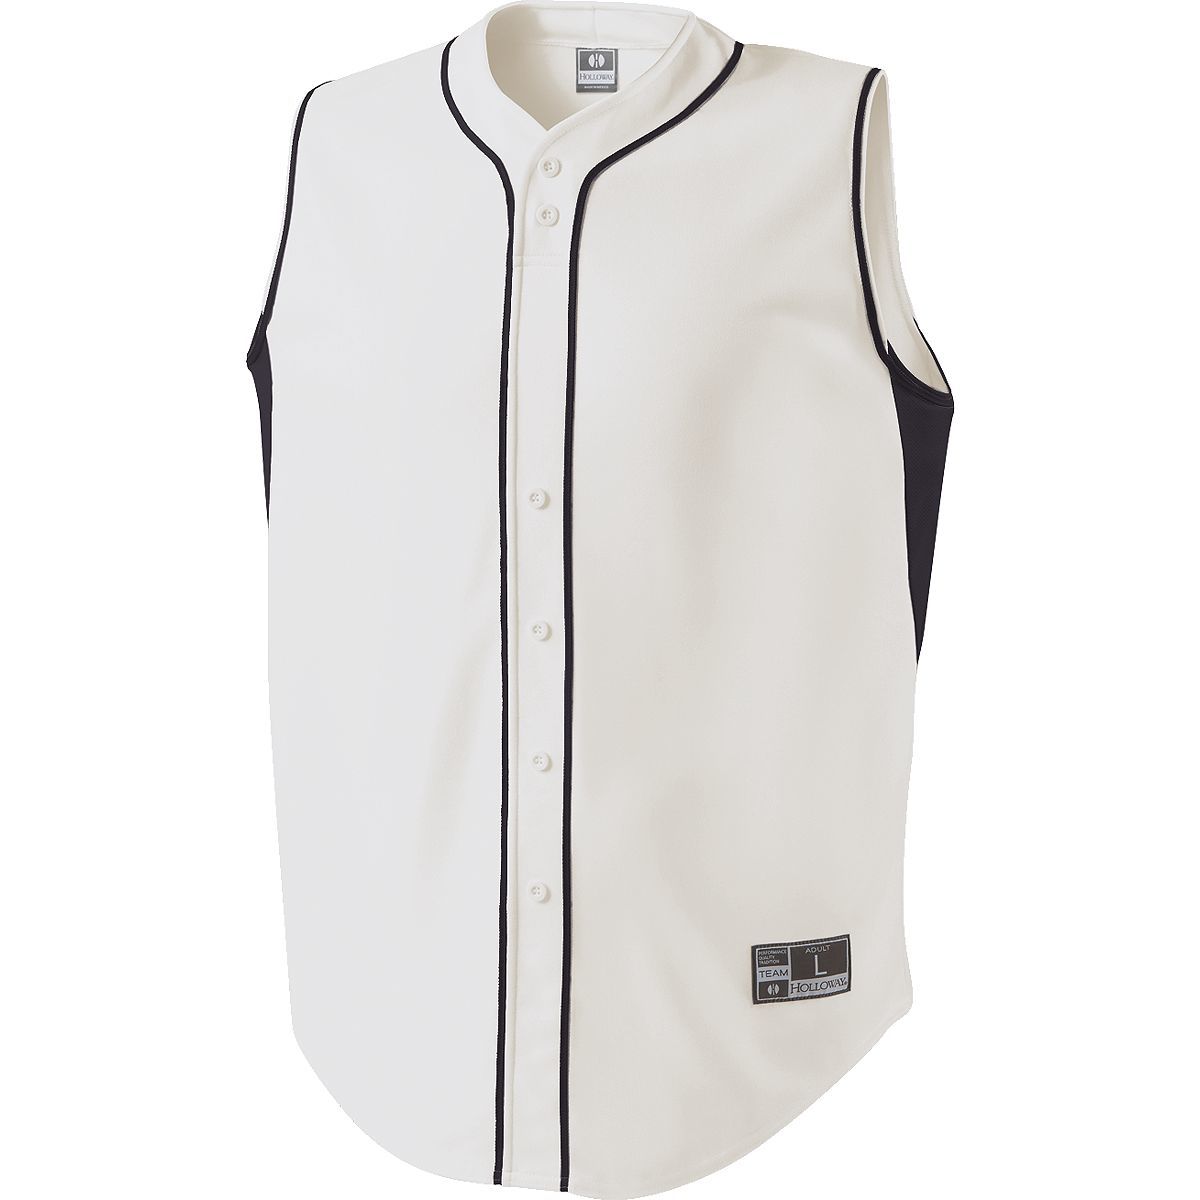 Holloway Fierce Jersey in White/Black  -Part of the Adult, Adult-Jersey, Baseball, Holloway, Shirts, All-Sports, All-Sports-1 product lines at KanaleyCreations.com